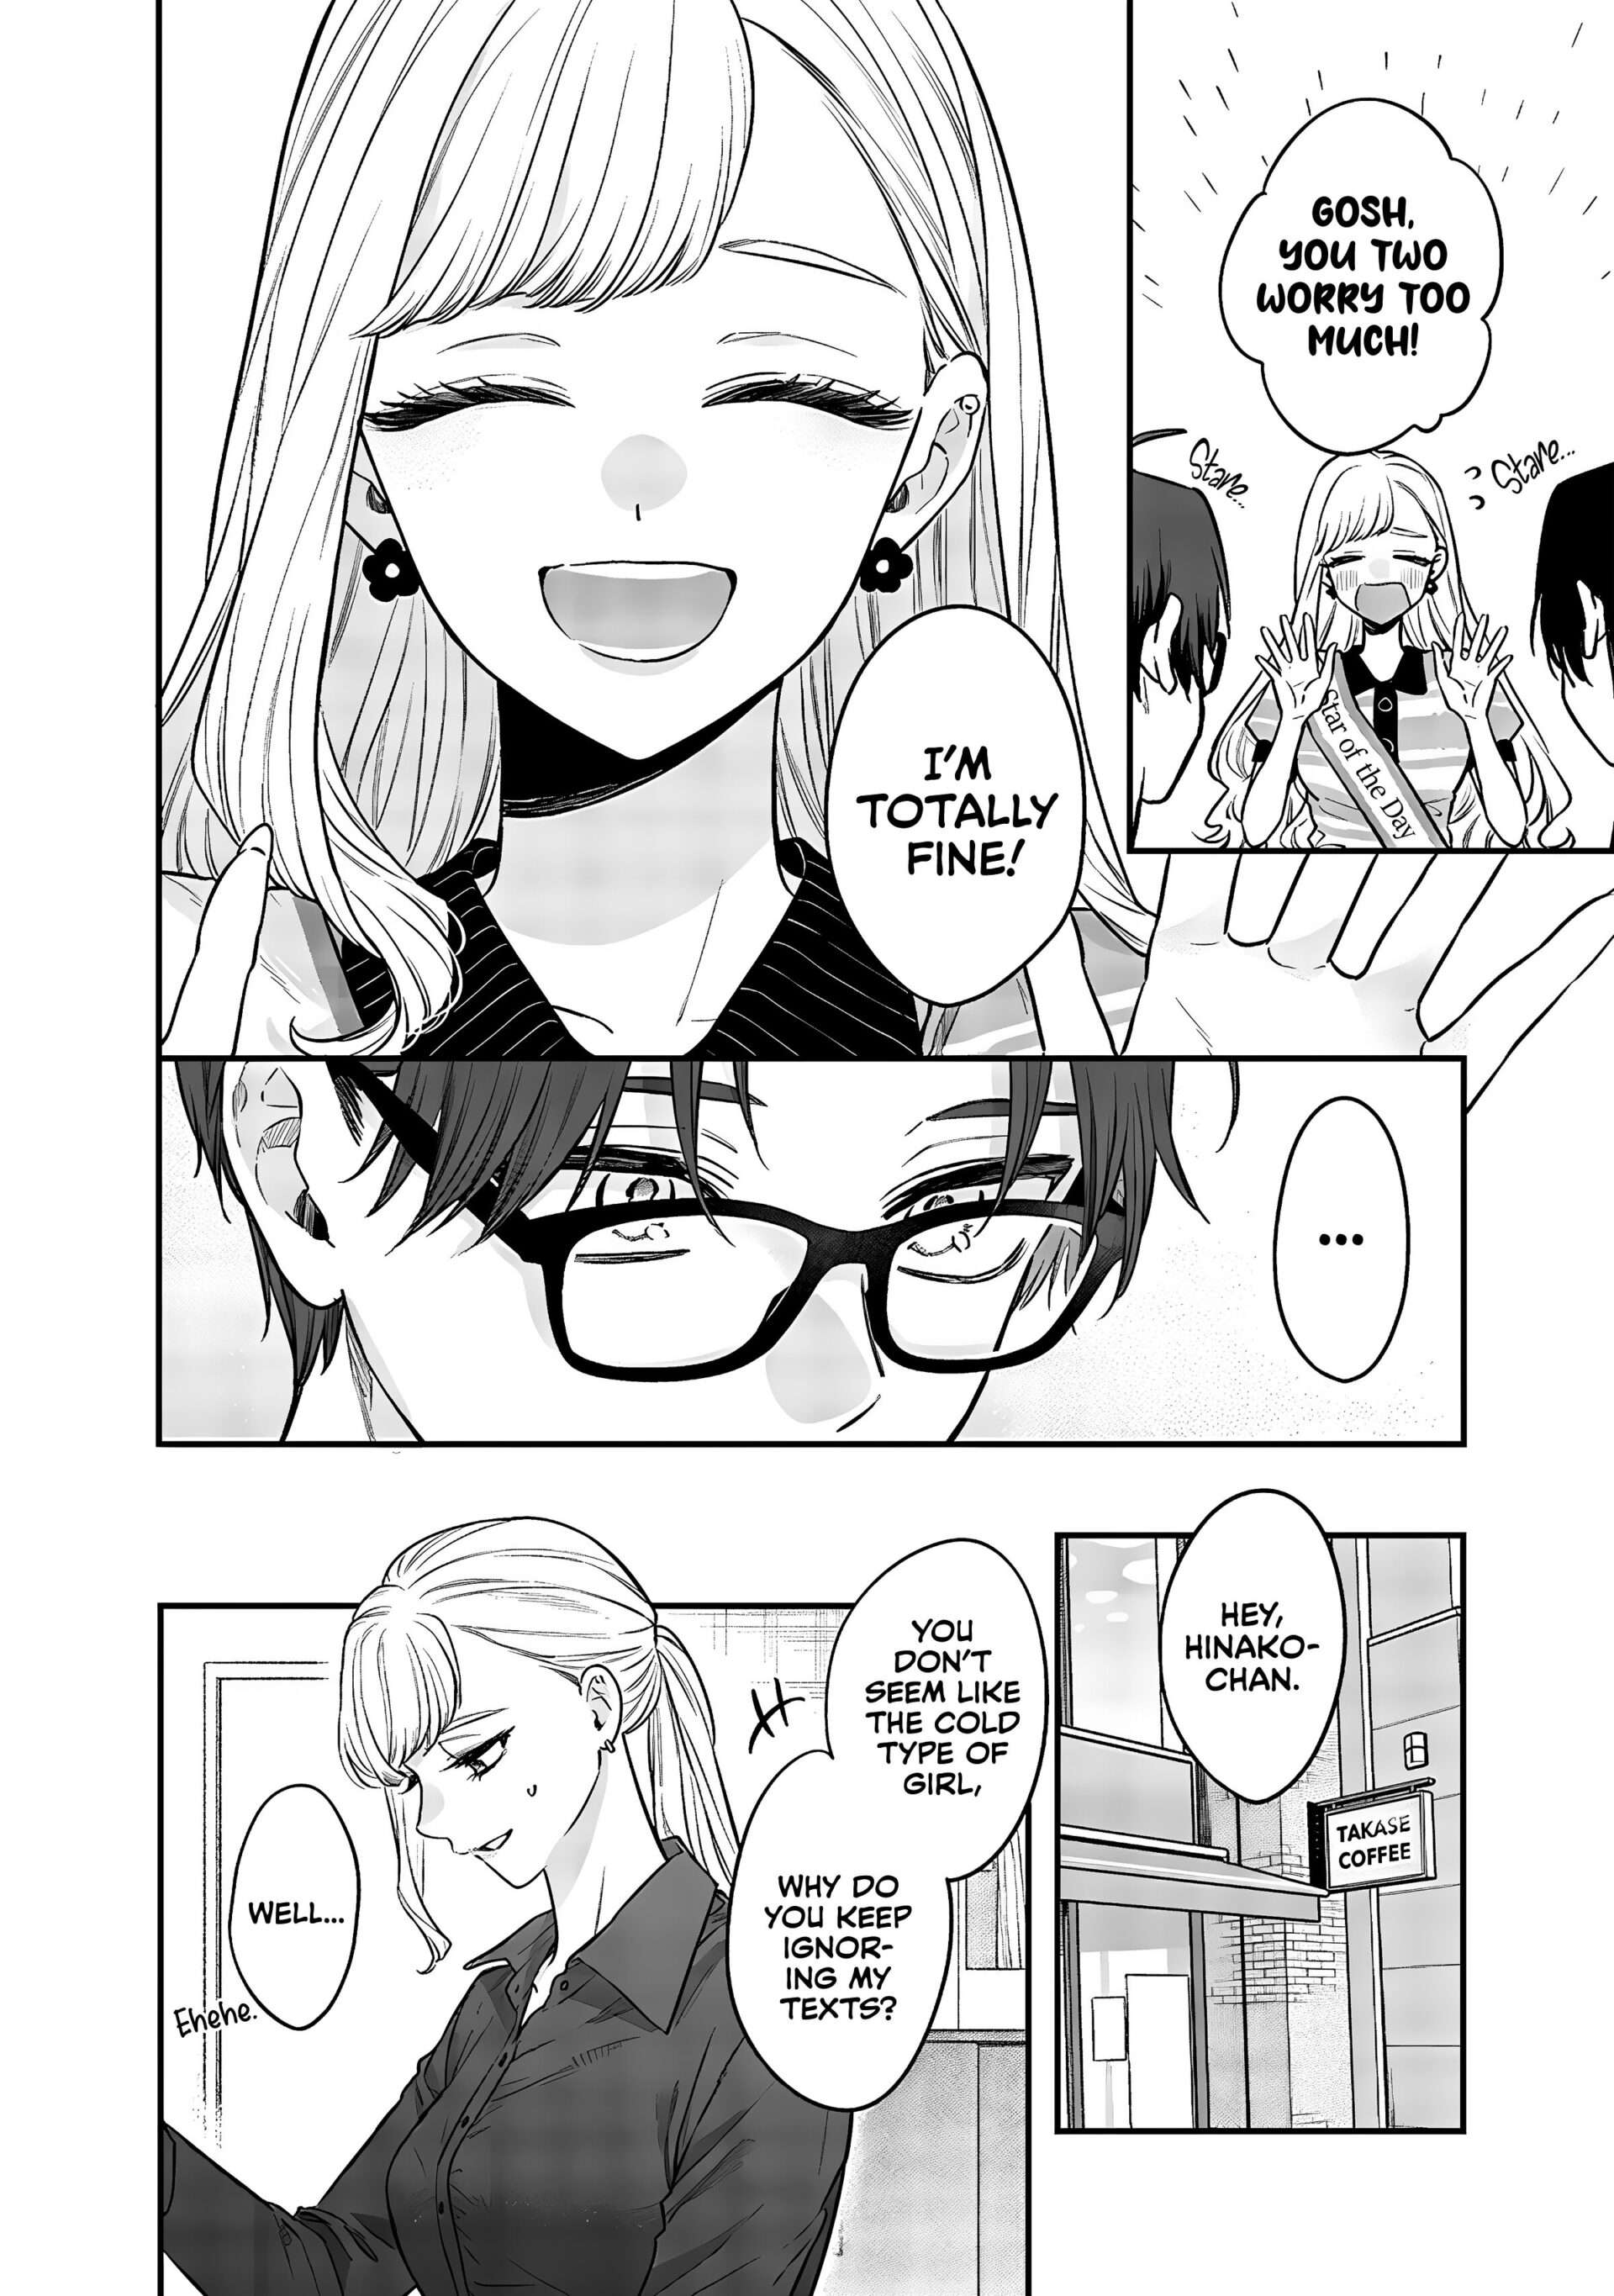 The Cutest Girl Closest To Me - chapter 7.5 - #6